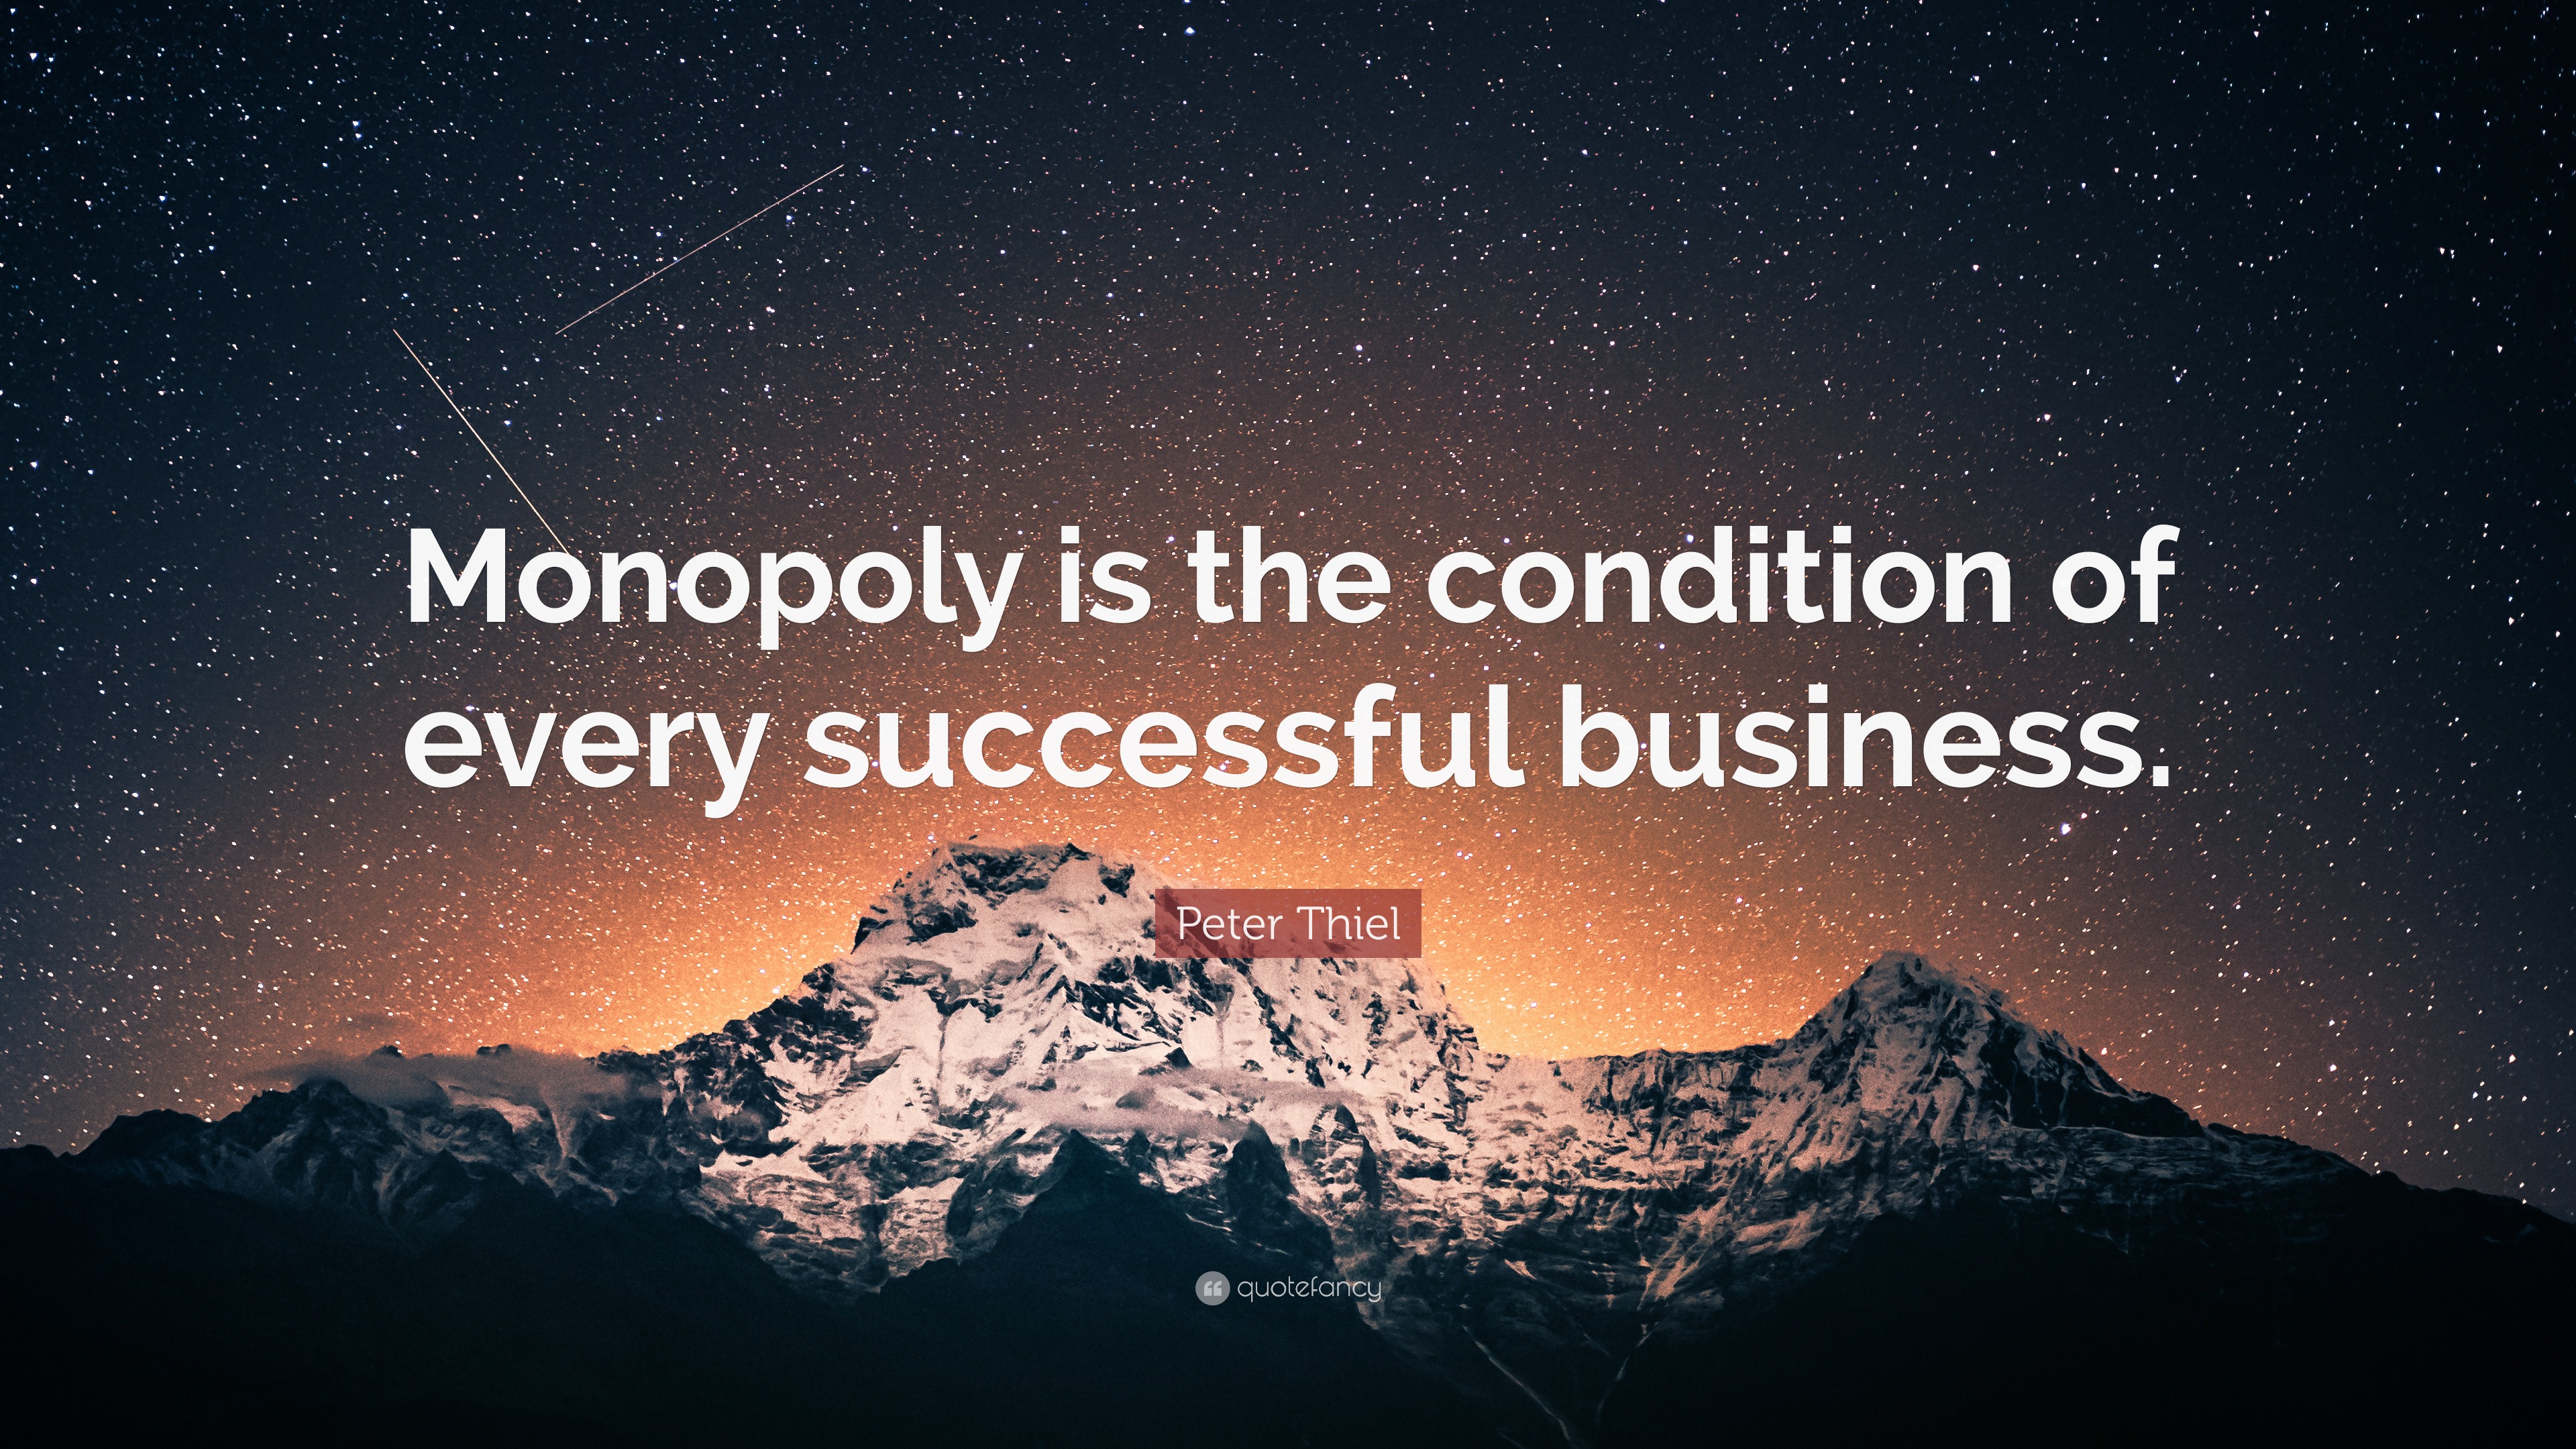 Peter Thiel Quote: “Monopoly is the condition of every successful